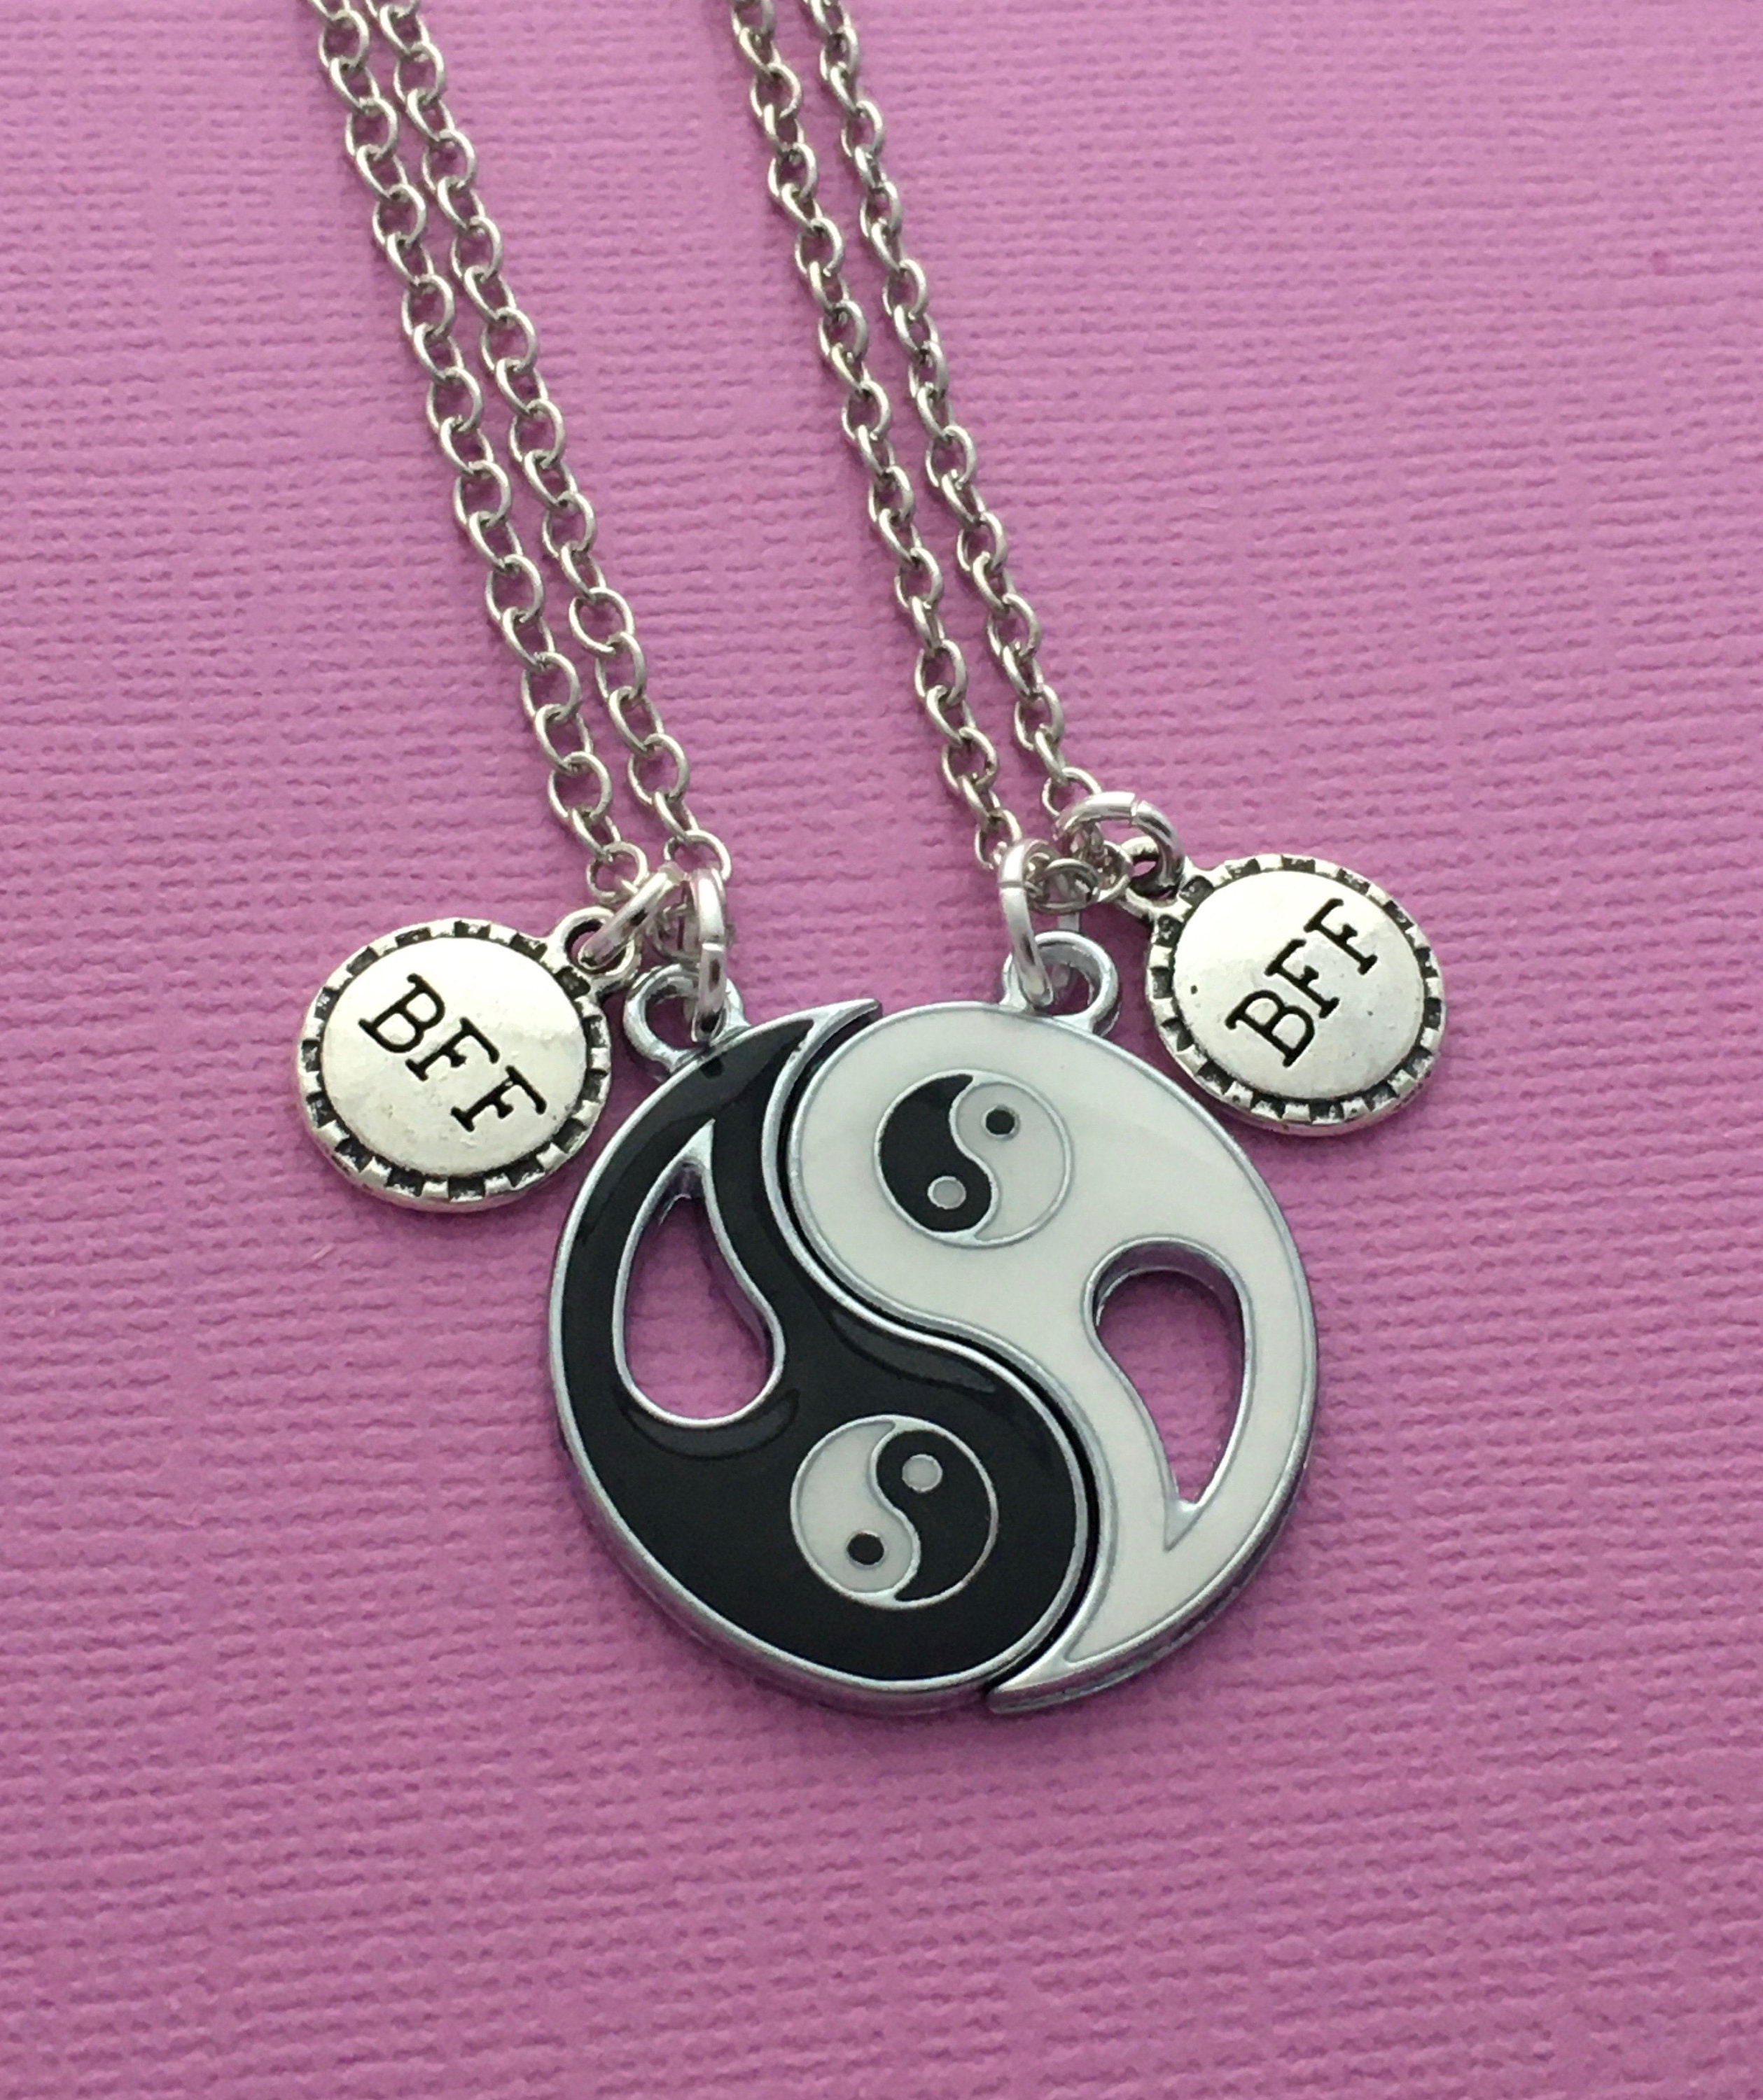 2 Friends Necklaces Ying Yang Necklace Set Bff Necklaces Etsy Uk 